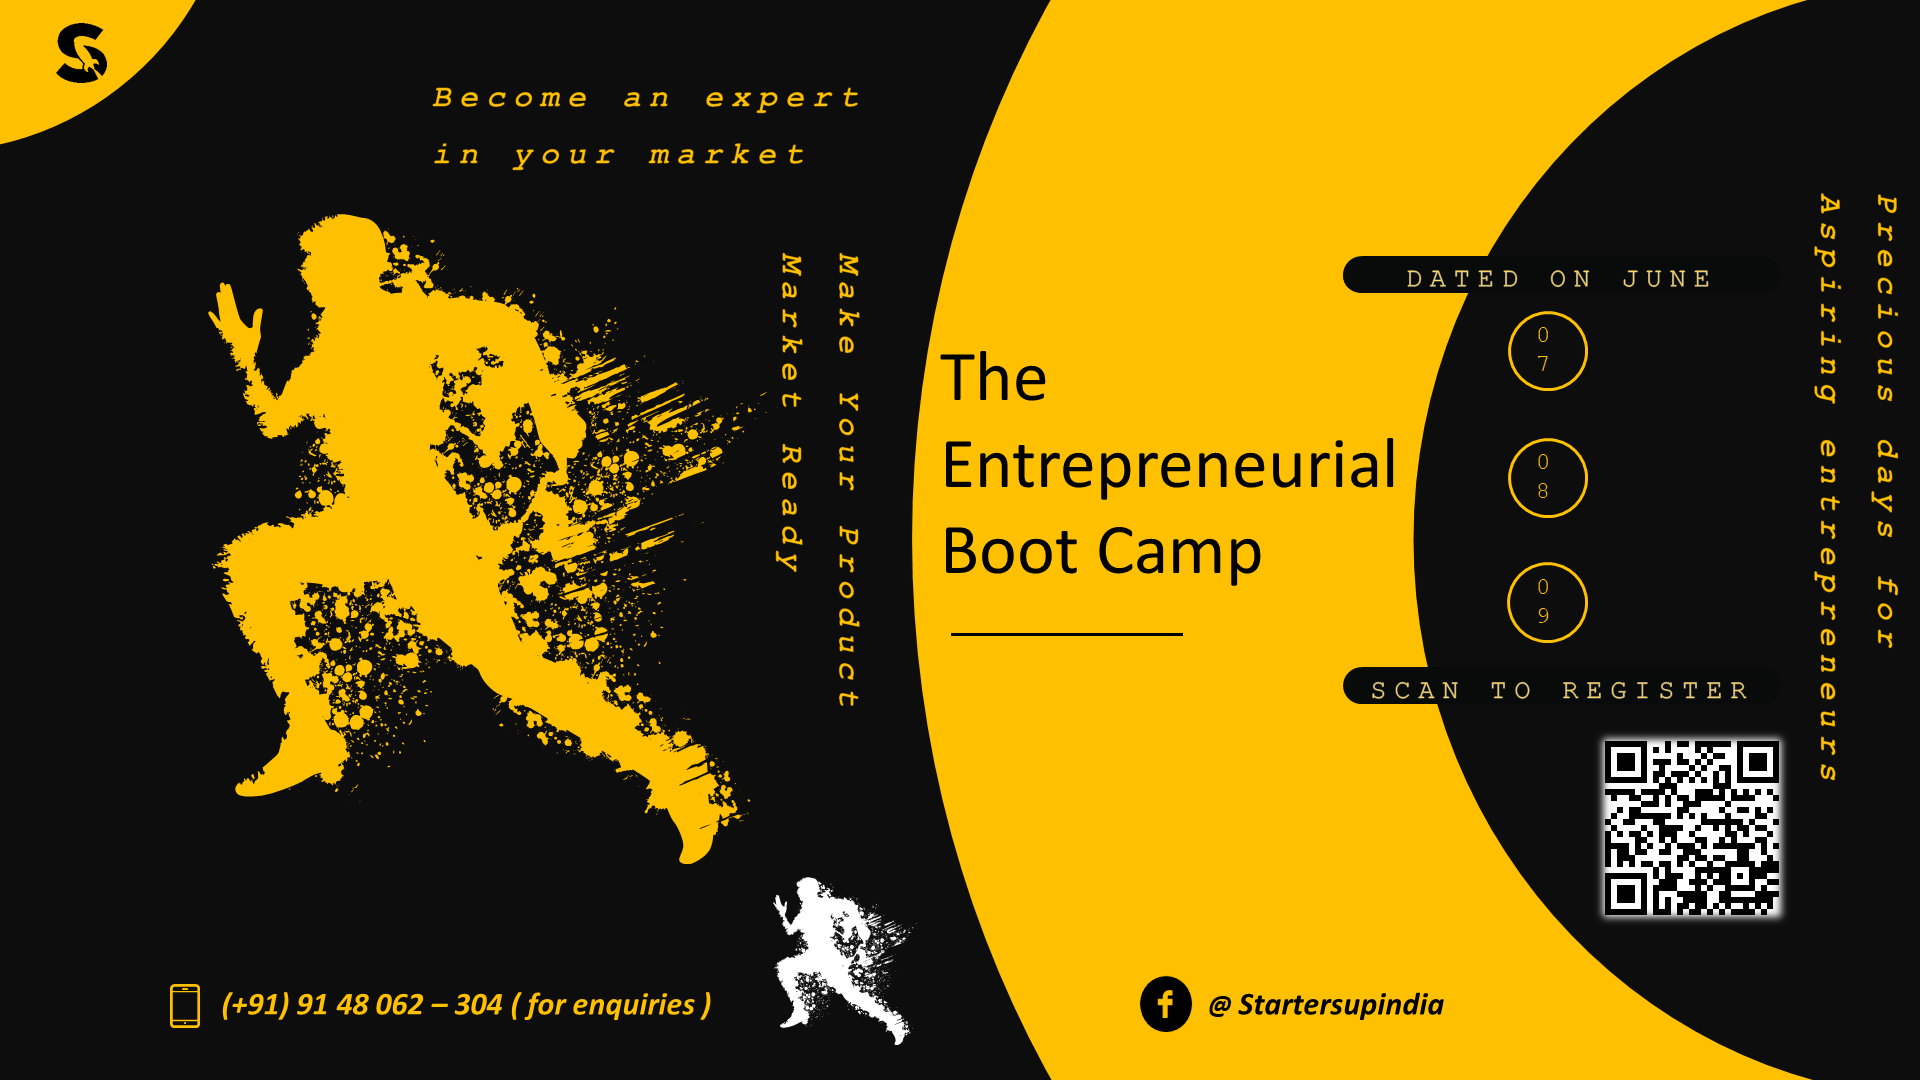 The Entrepreneurial Boot Camp 2018